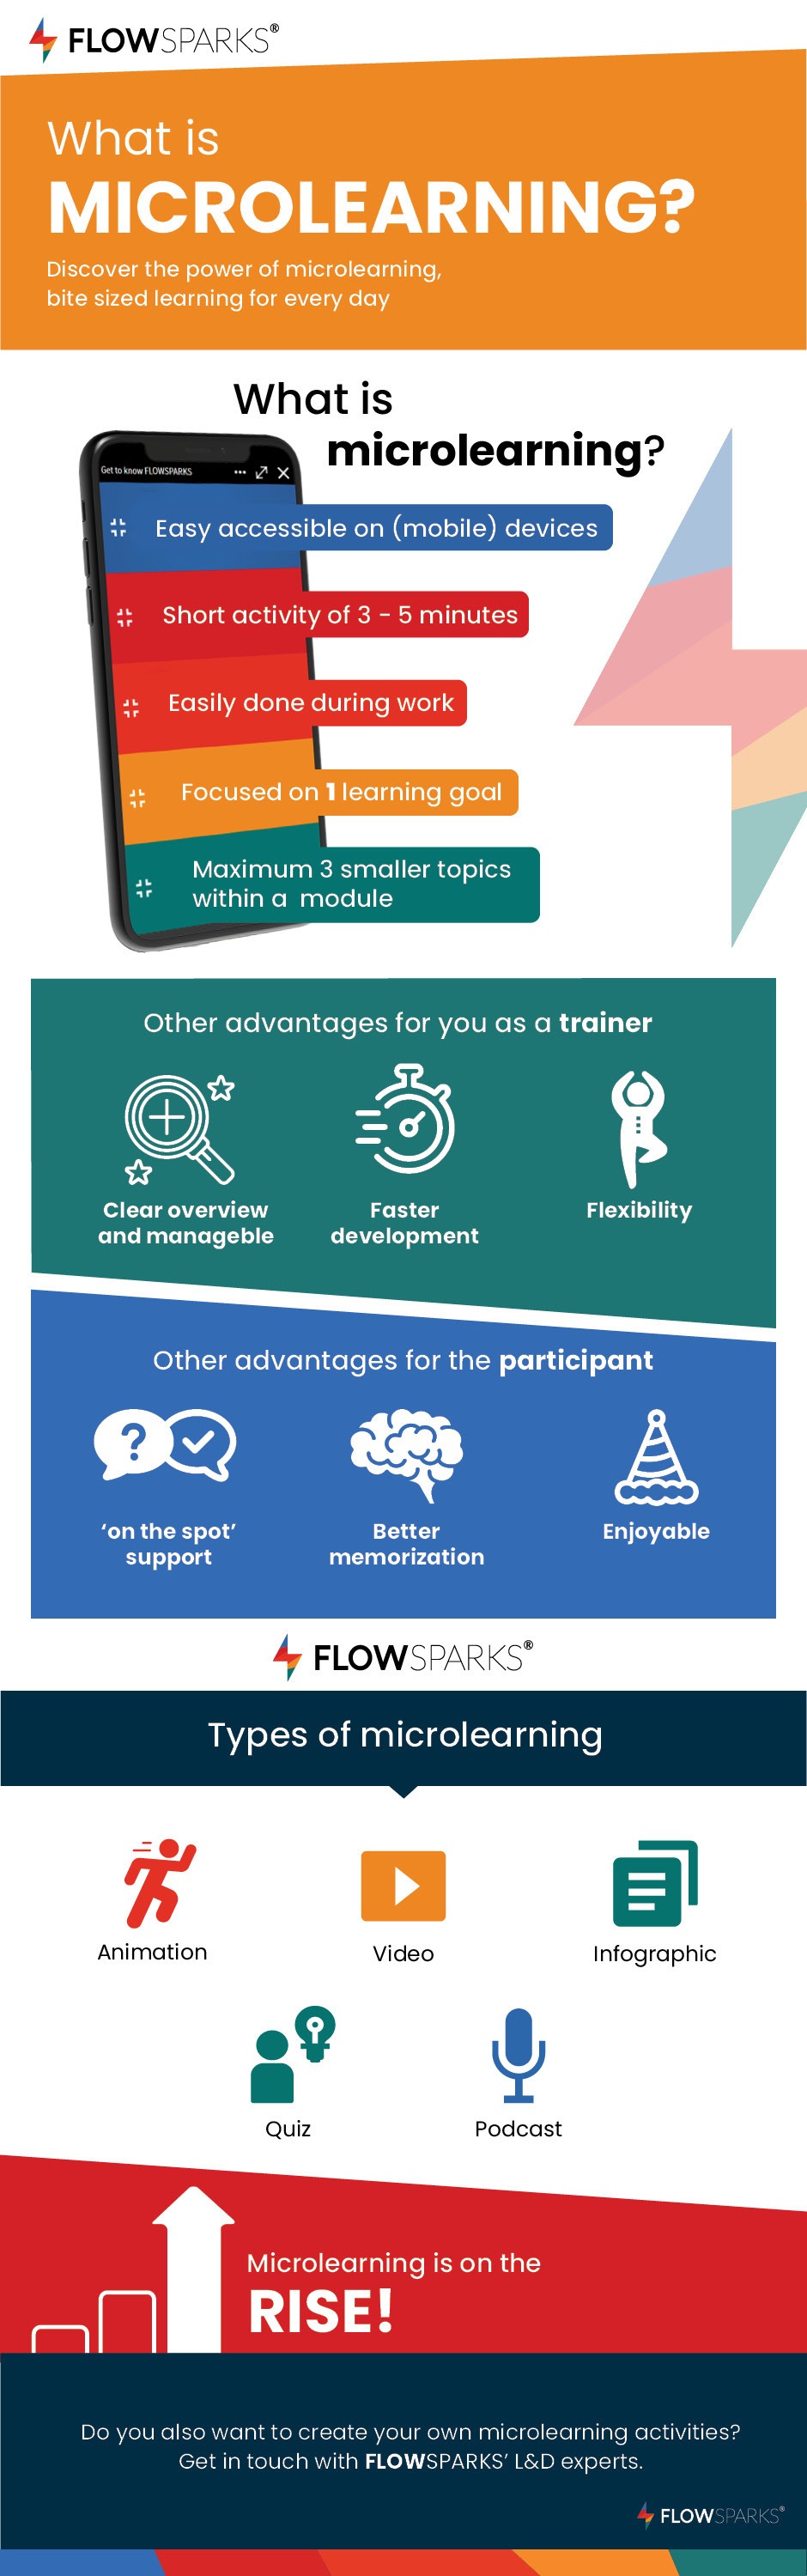 What Is Microlearning Within e-Learning—Infographic